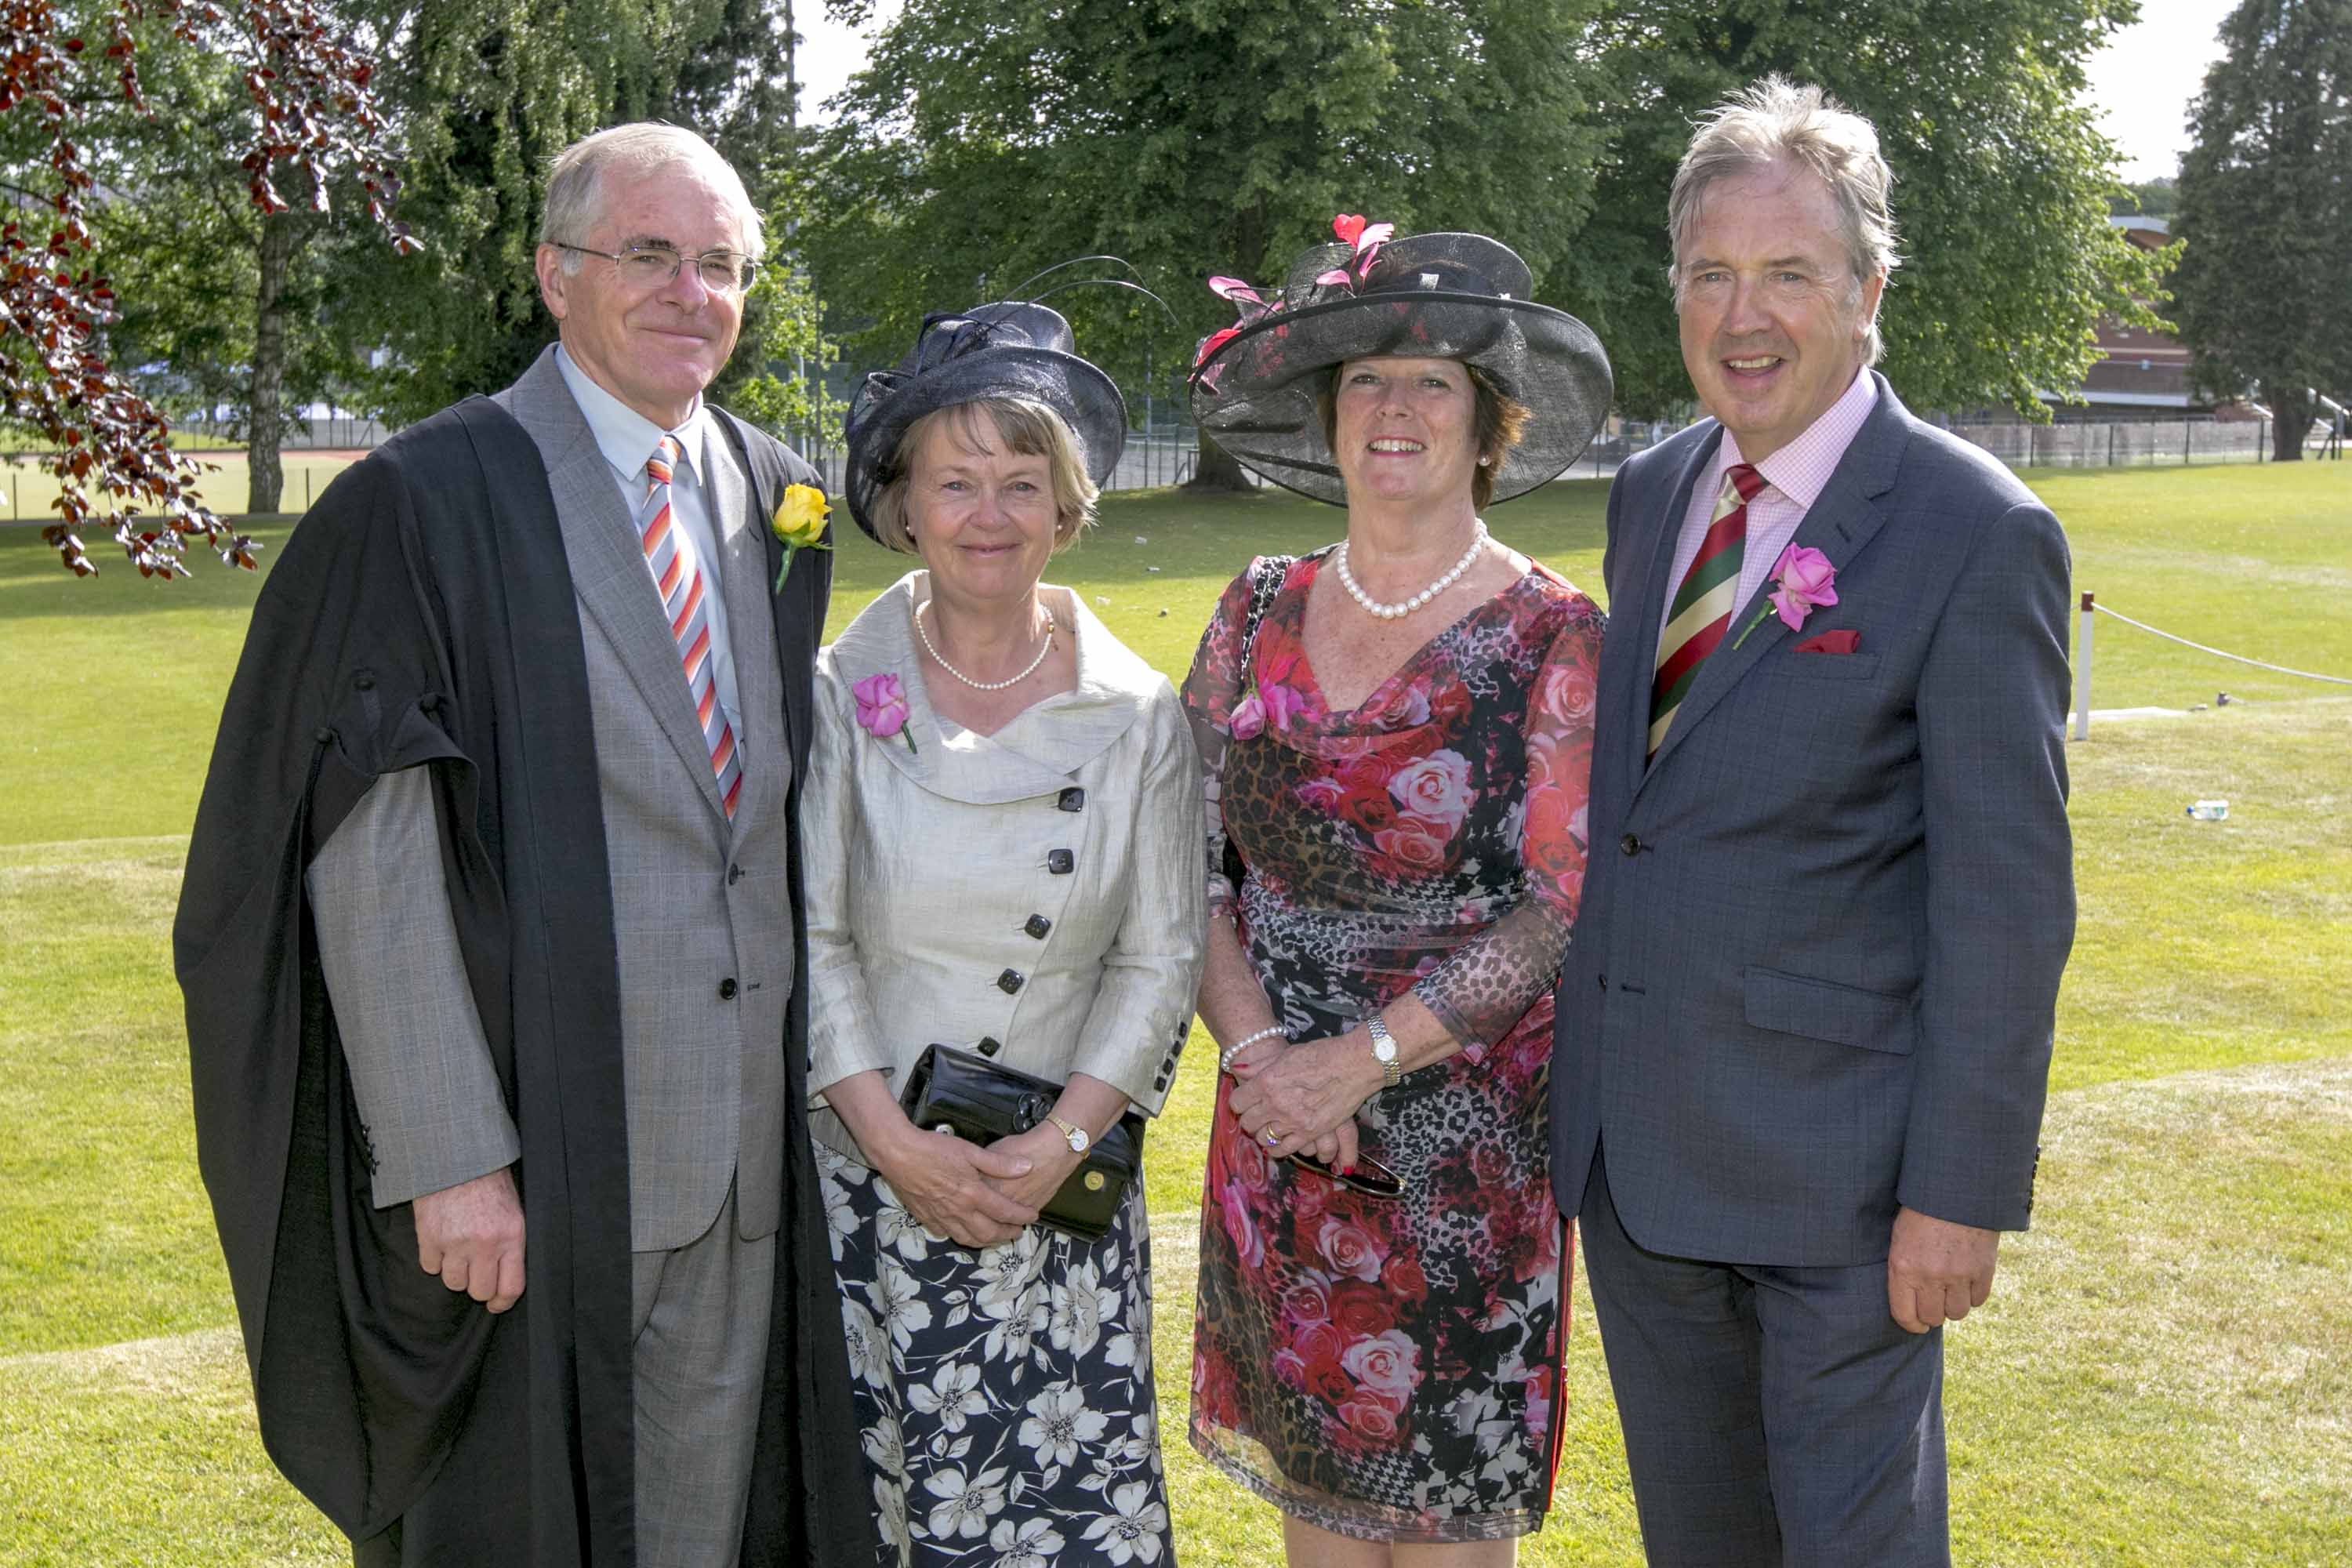 Mr Bowen, Mrs Bowen with Mrs Horton and Former Chairman of Governors, Mr Matthew Horton